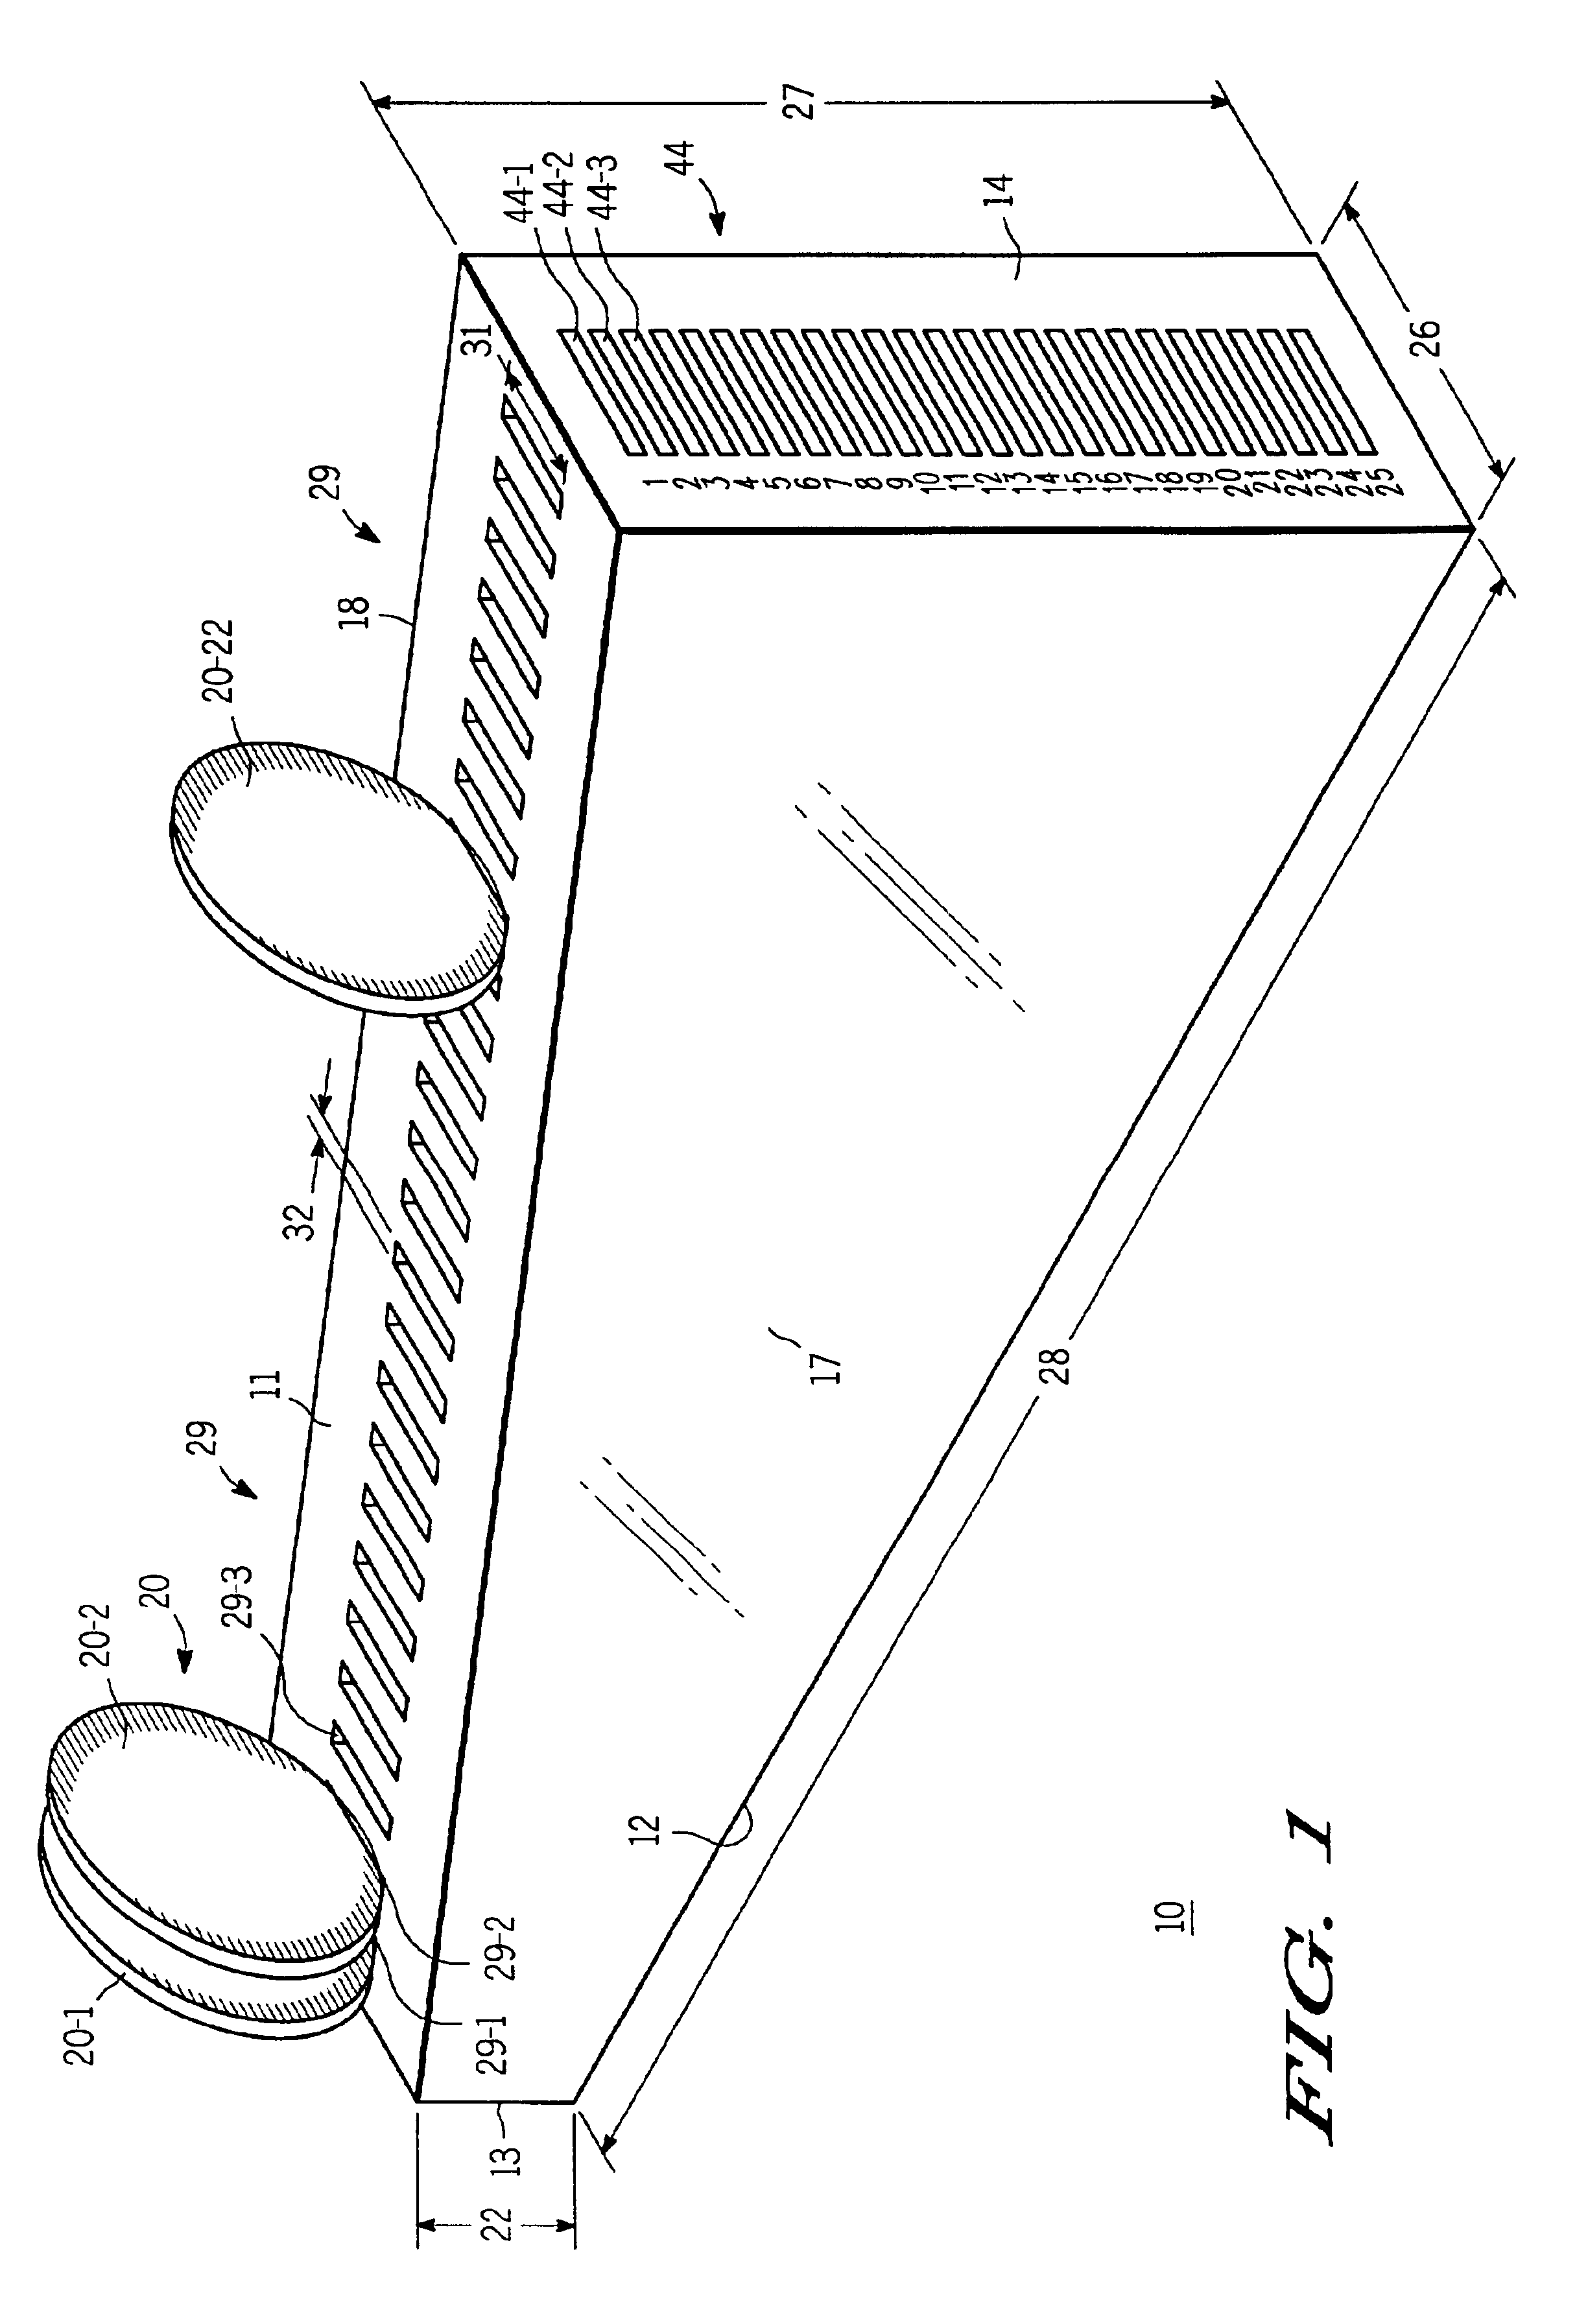 Apparatus for reading marks on a semiconductor substrate